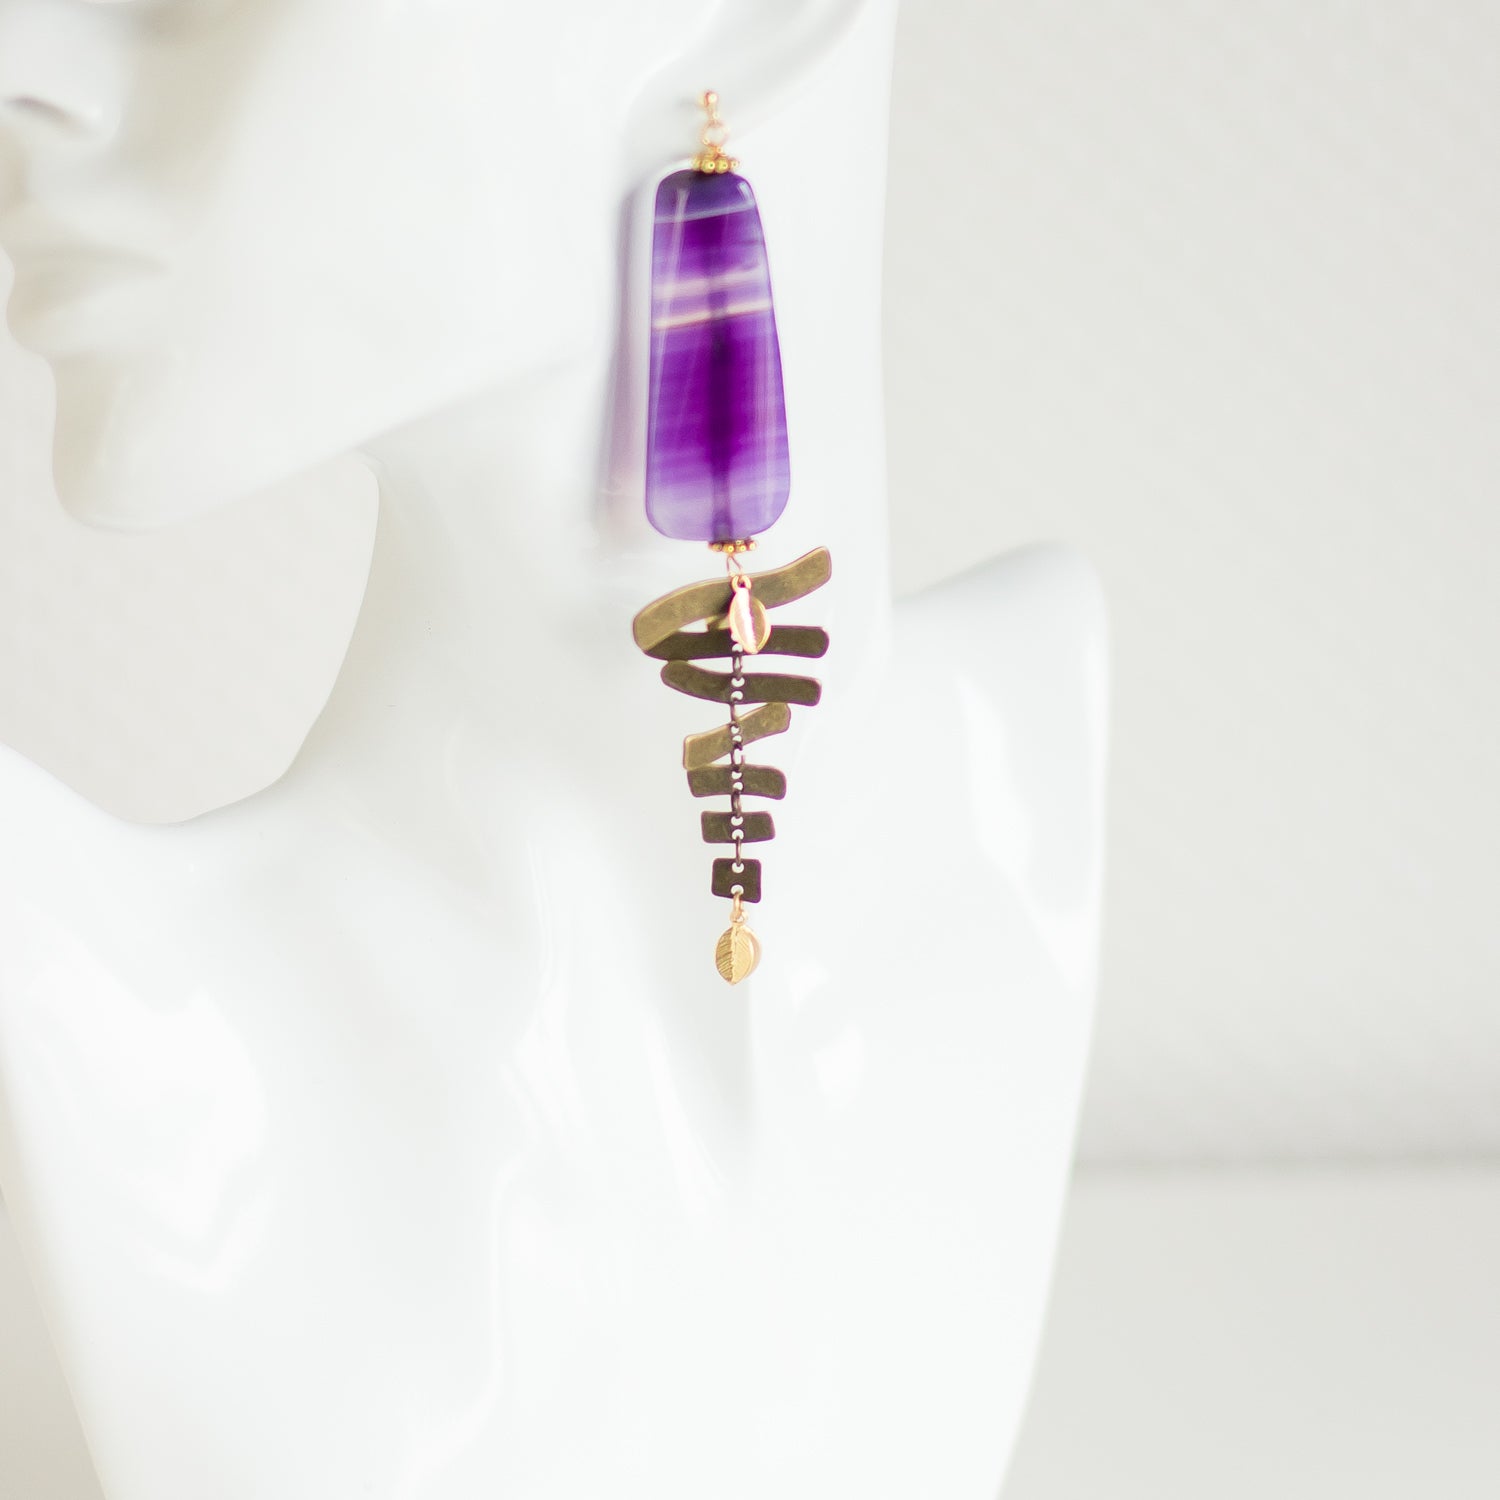 Shop online handmade Unique Long Earrings with agate. Large Purple Dangle drop earrings. Agate stone jewelry. OOAK fashion accessories. Natural stone jewelry.